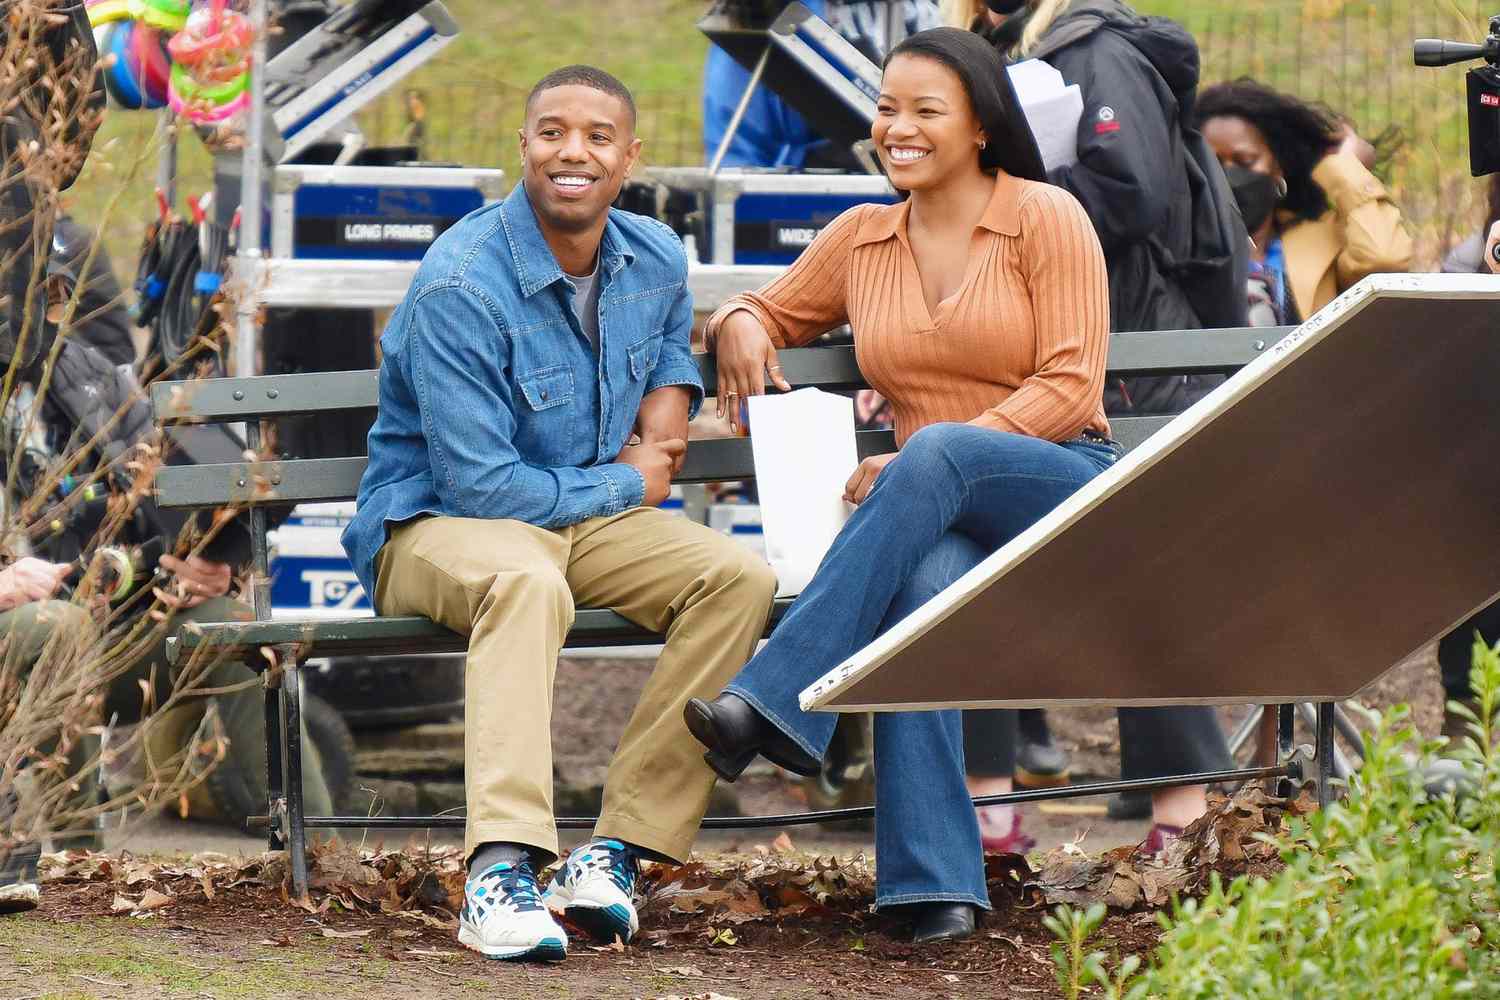 Michael B. Jordan and Chante Adams seen on the set of "Journal for Jordan" in Central Park on March 25, 2021 in New York